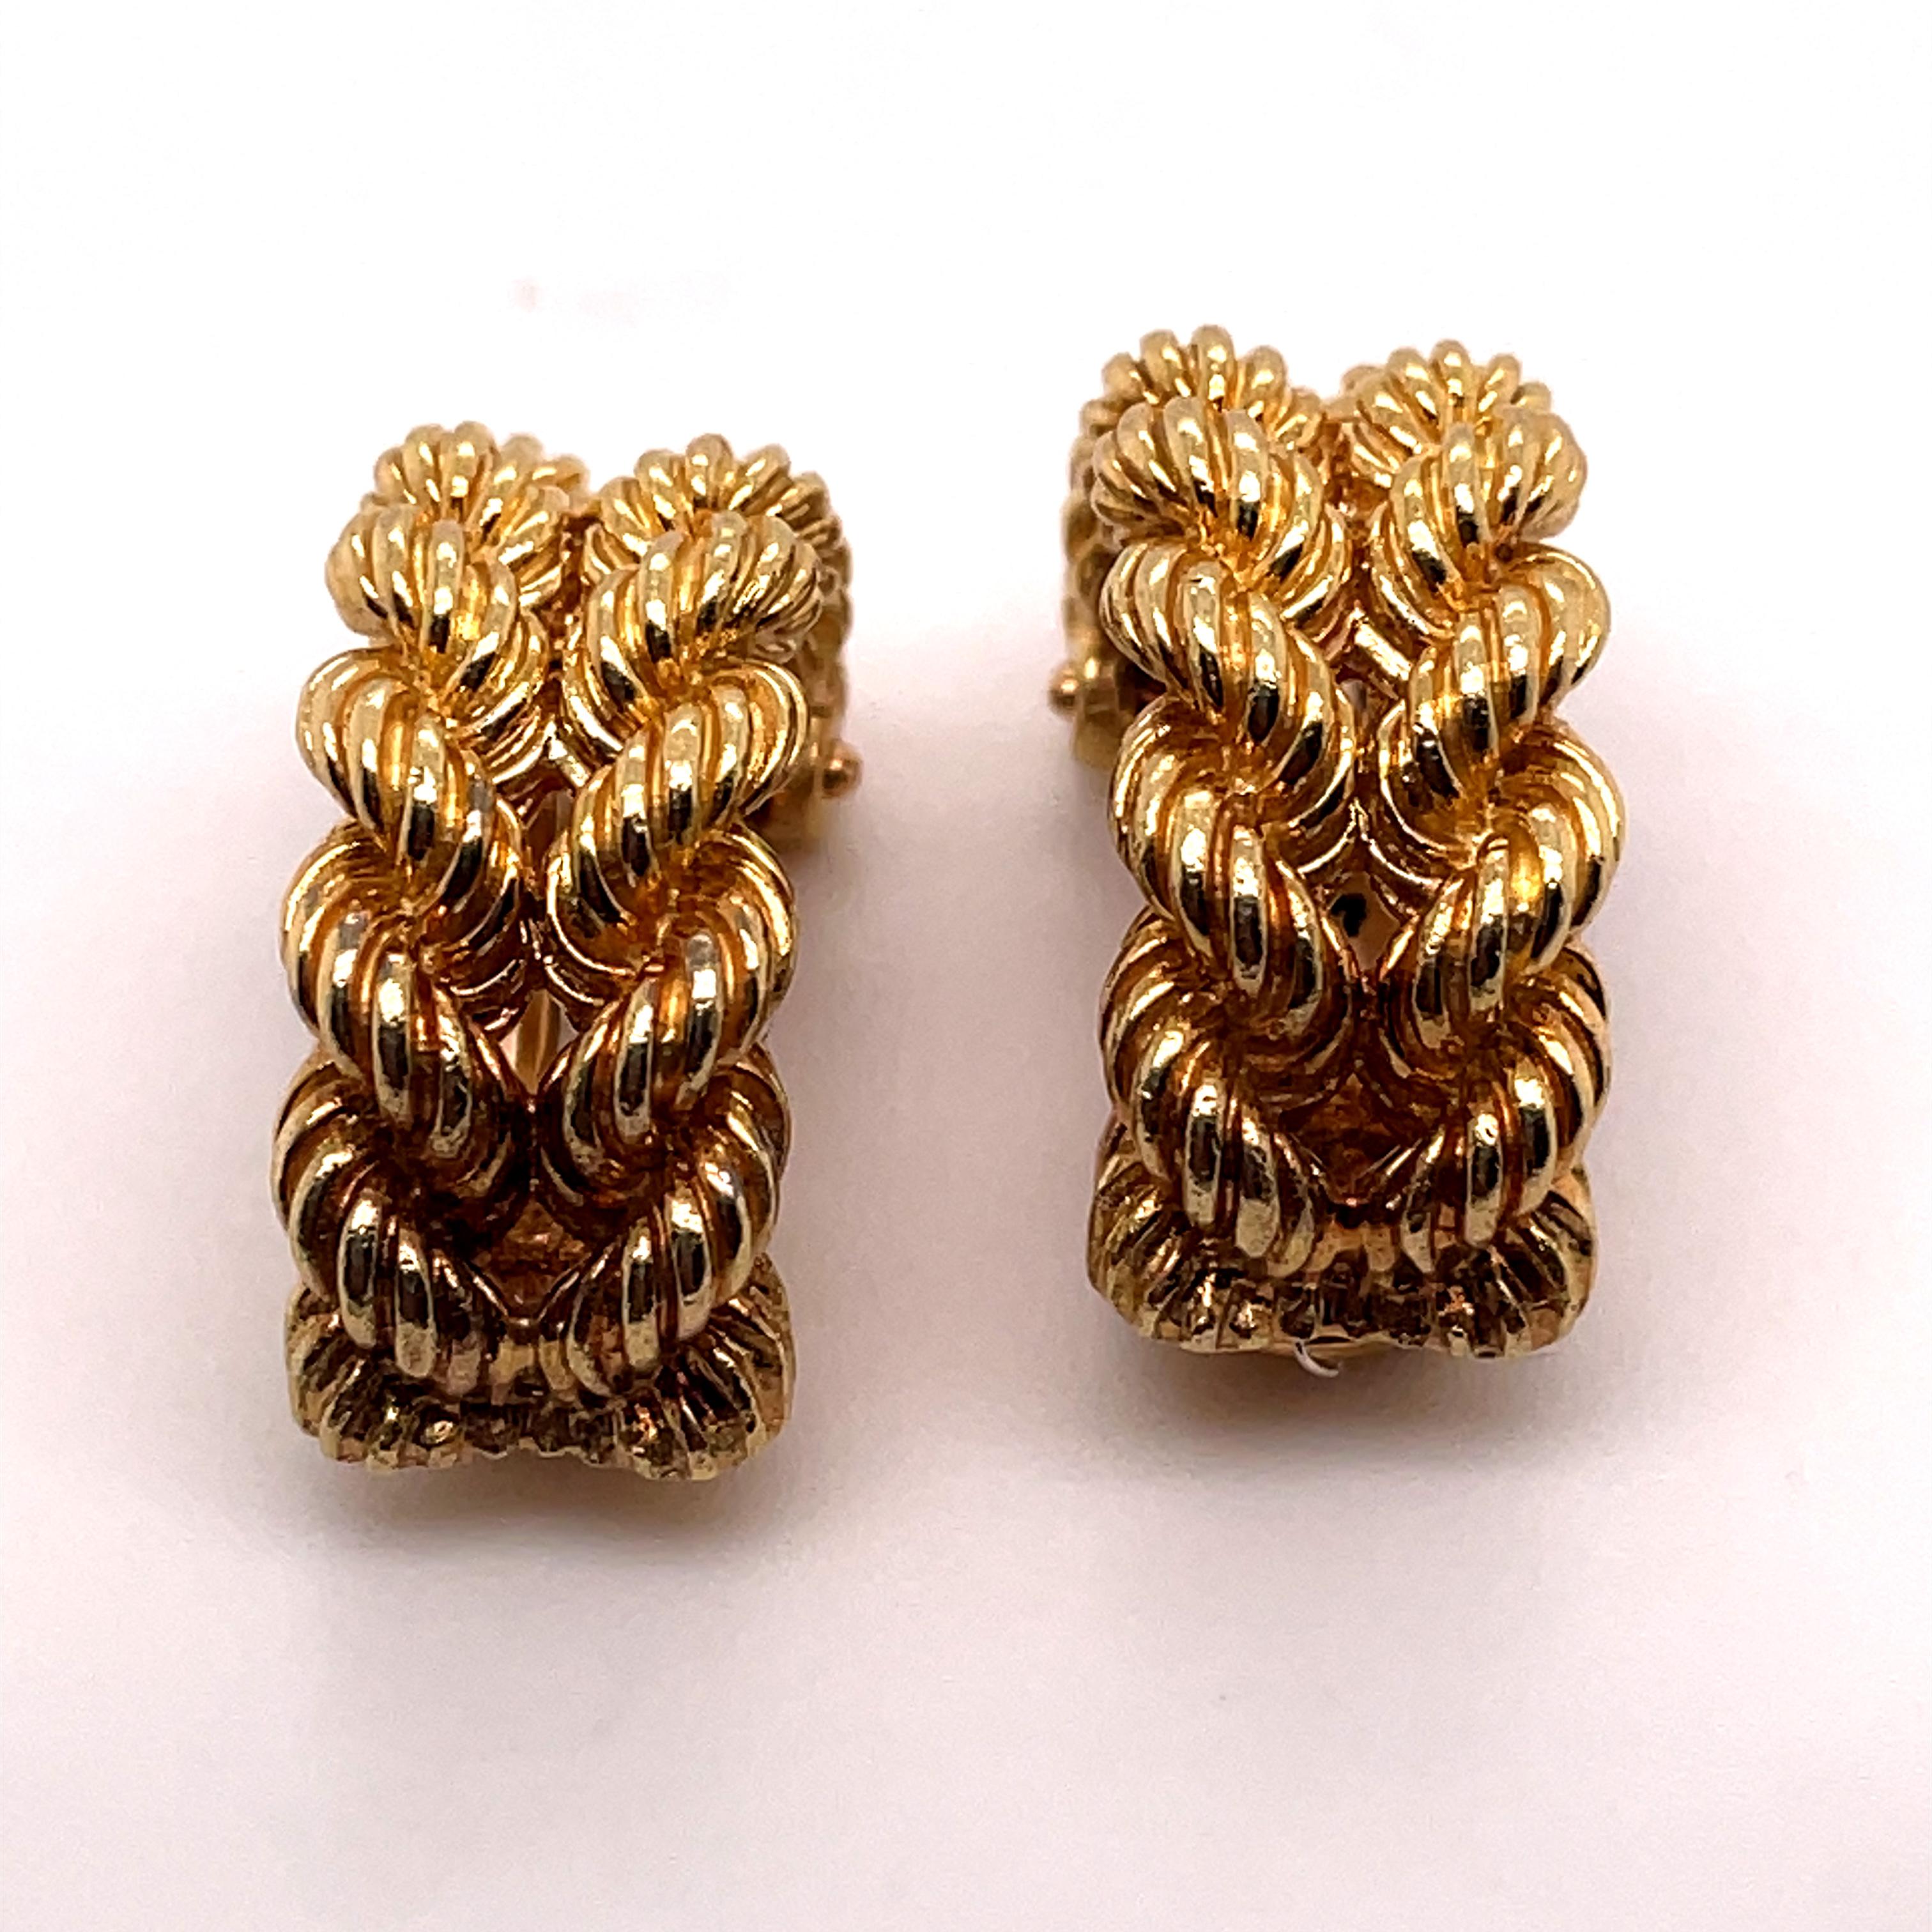 A pair of Hermès 18 karat yellow gold rope twist hoop earrings, circa 1960.

Each vintage earring is designed as a double row of finely twisted polished gold. They are secured to the reverse with clip fittings. 

Due to their design and size these